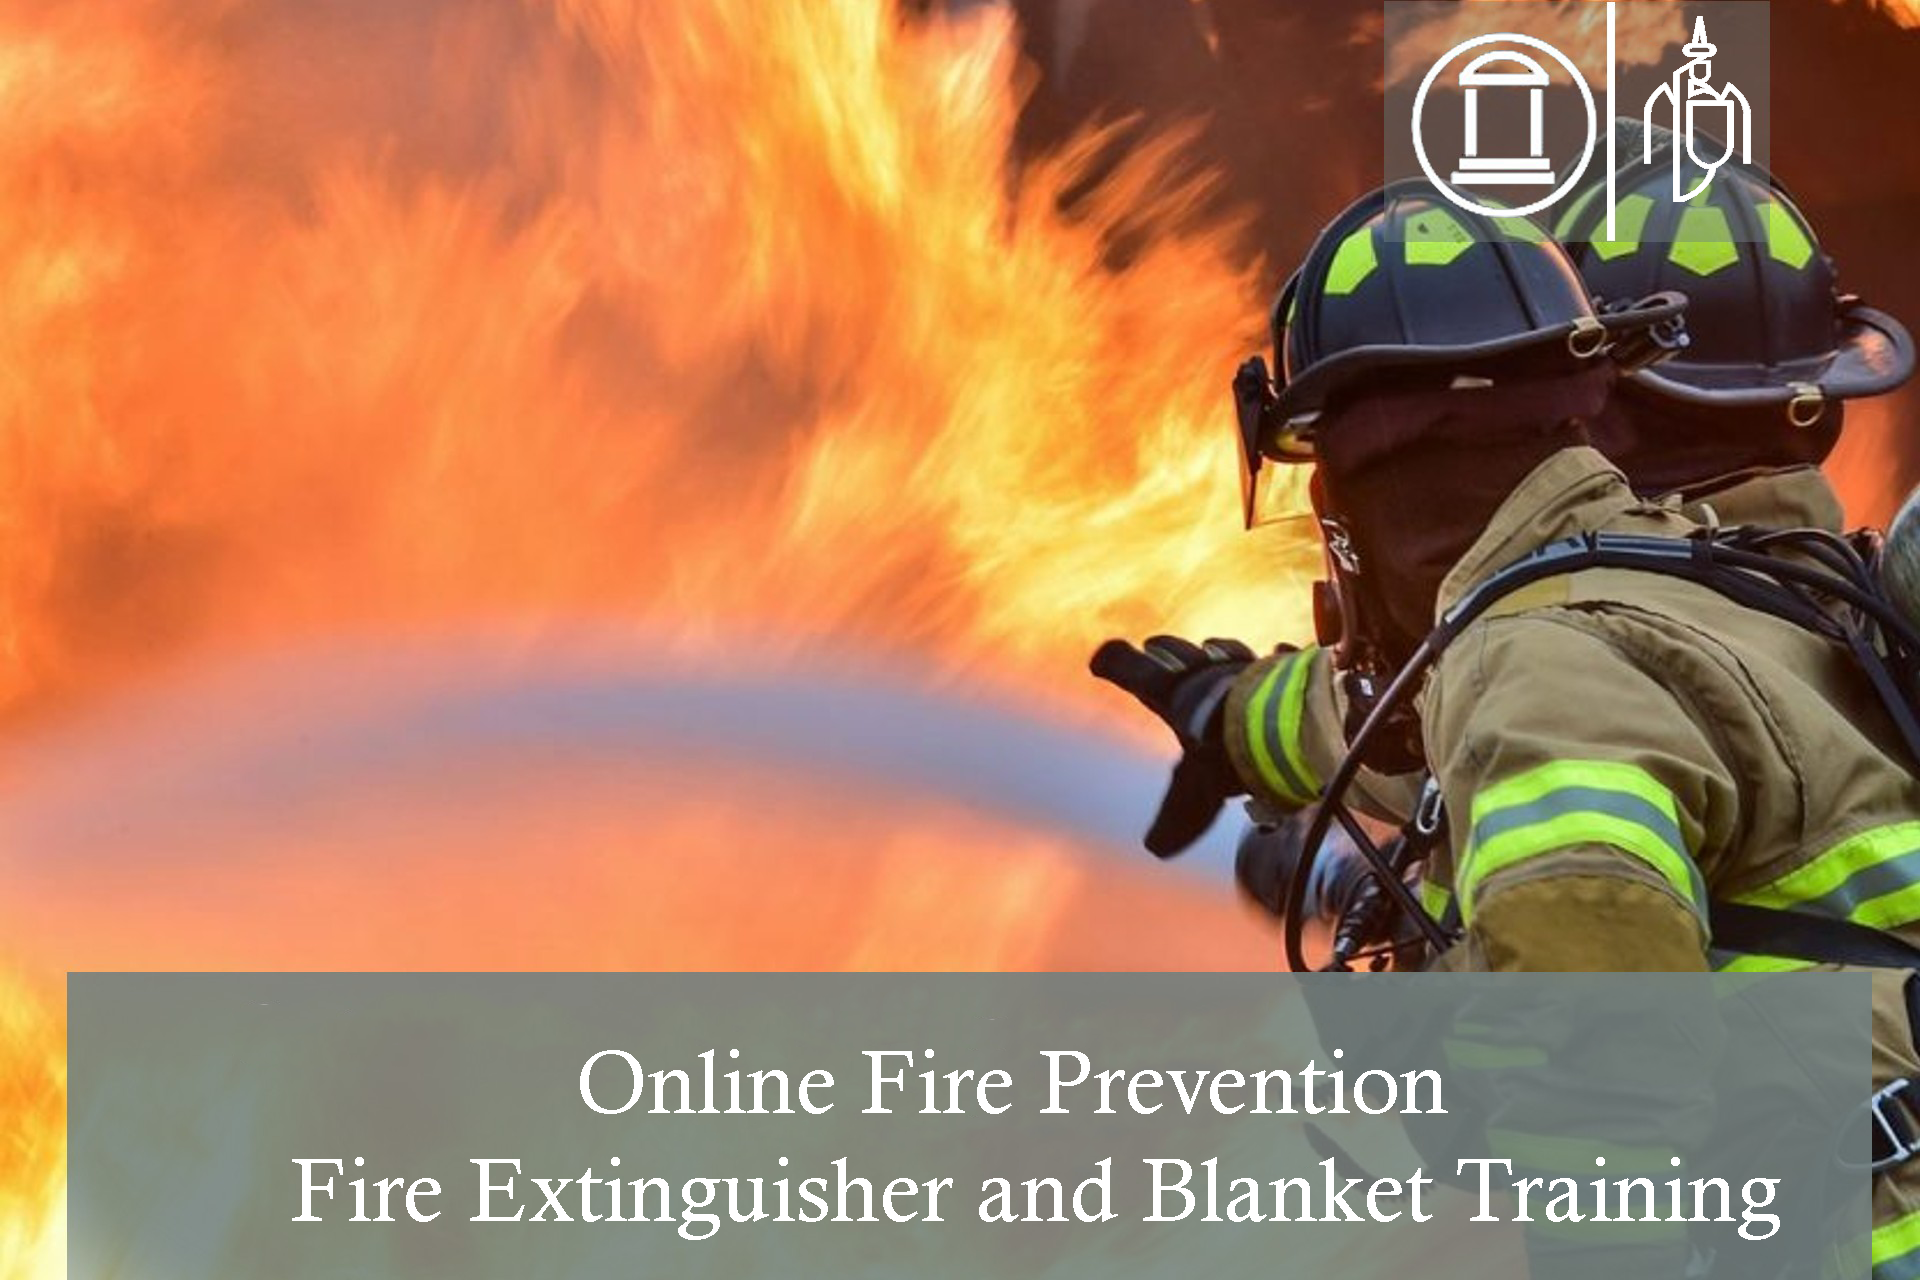 Online Fire Prevention & Fire Extinguisher and Blanket Training